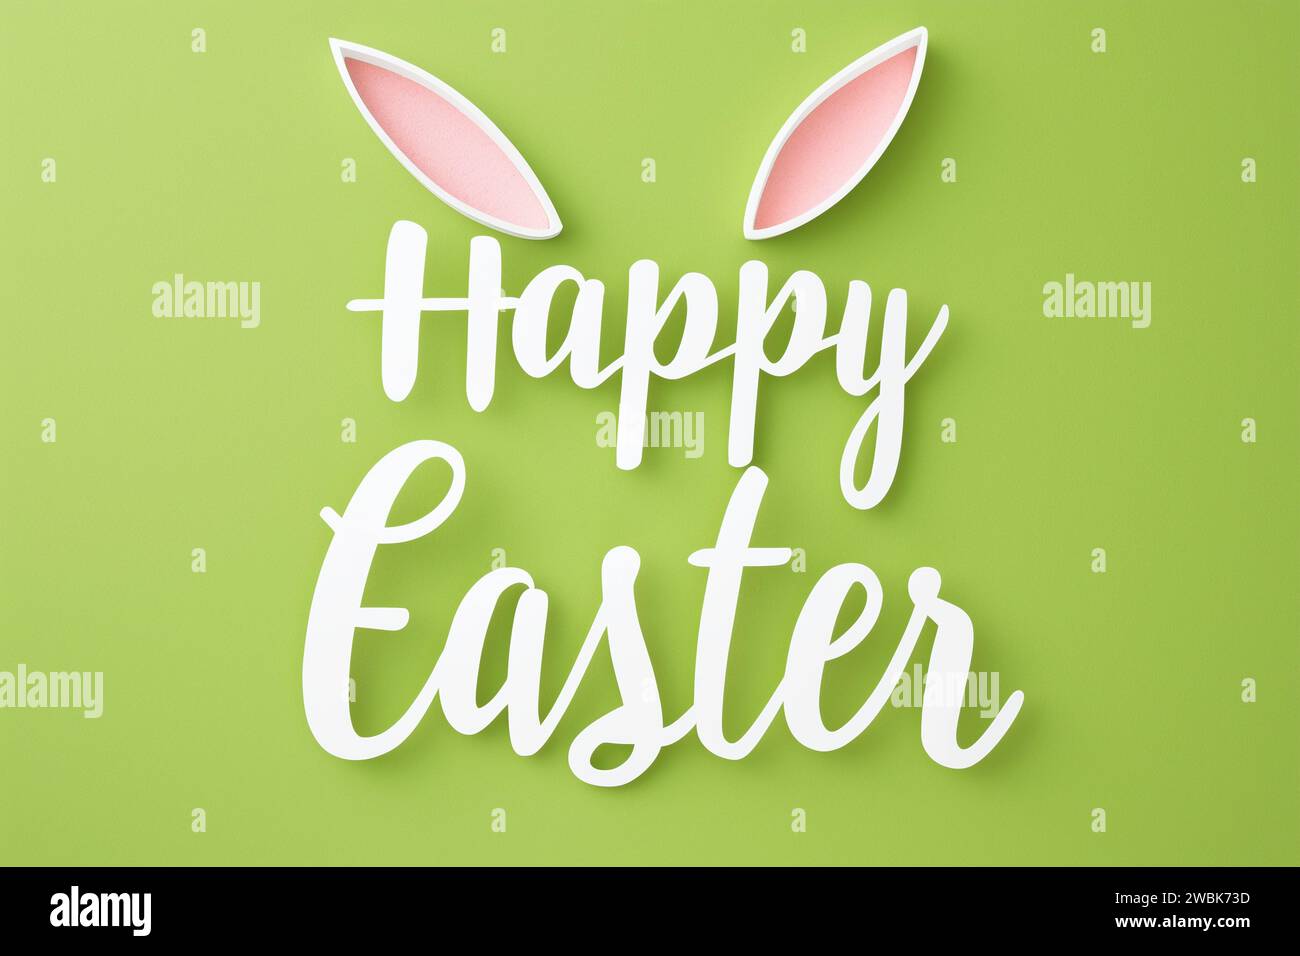 Fresh Spring Greeting: Happy Easter with Bunny Ears on Lively Green Background Stock Photo